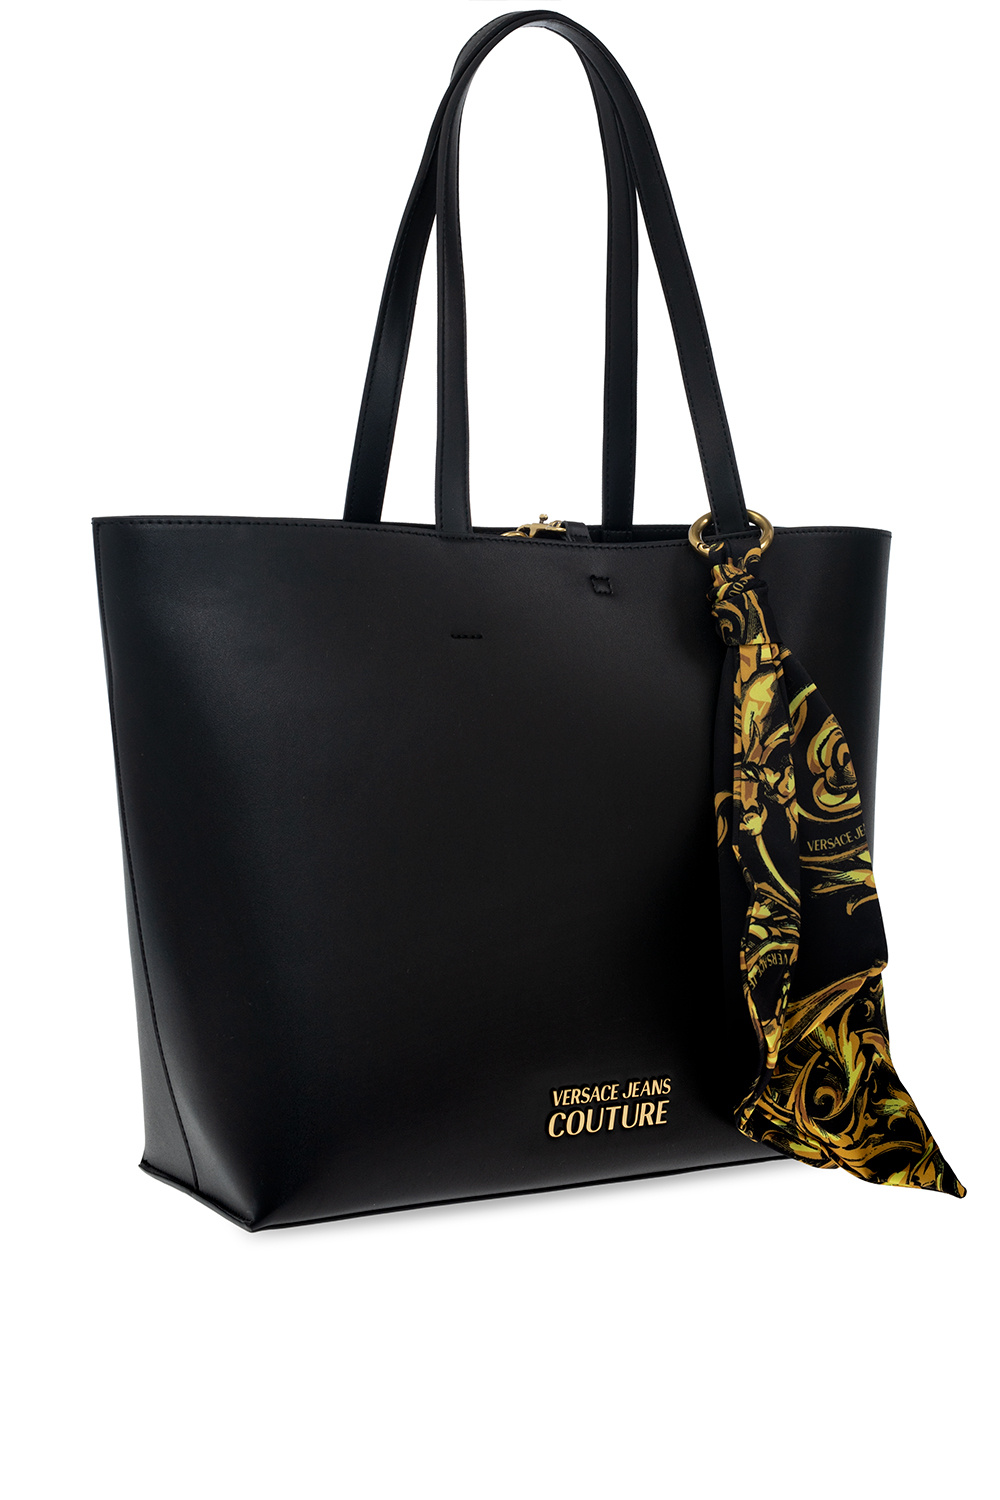 Versace Jeans Couture Small Thelma Tote Bag at FORZIERI